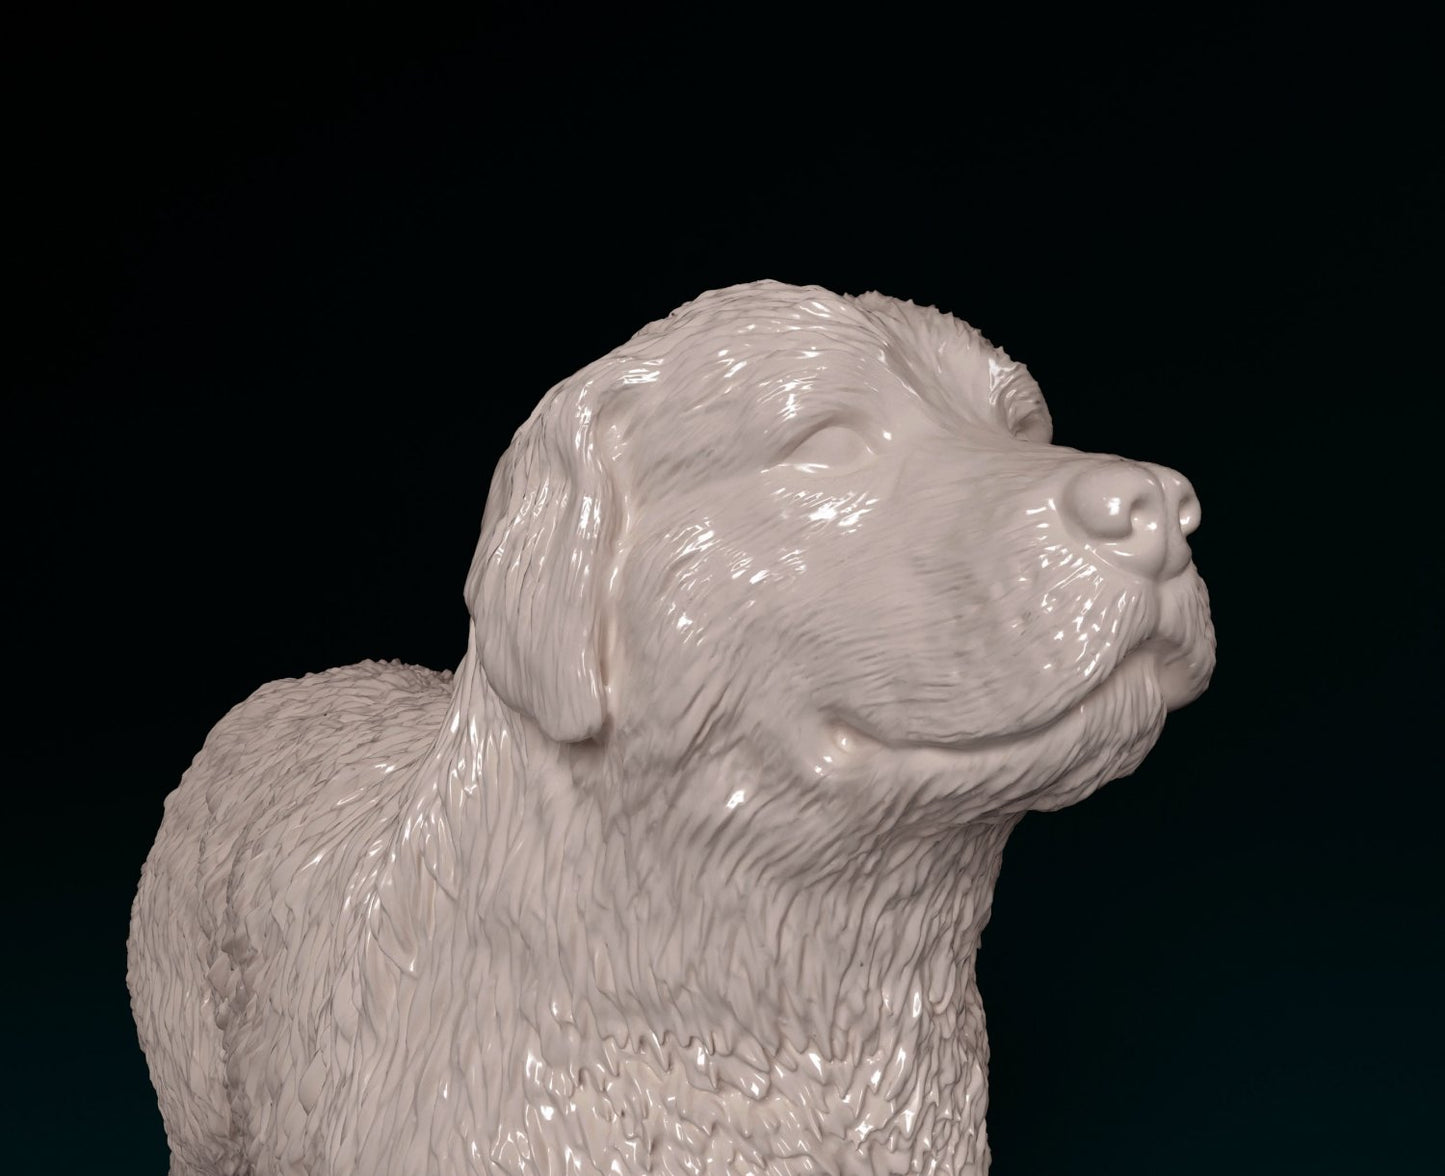 Pyr mountain dog artist resin - white resin ready to prep / paint ALL SCALES